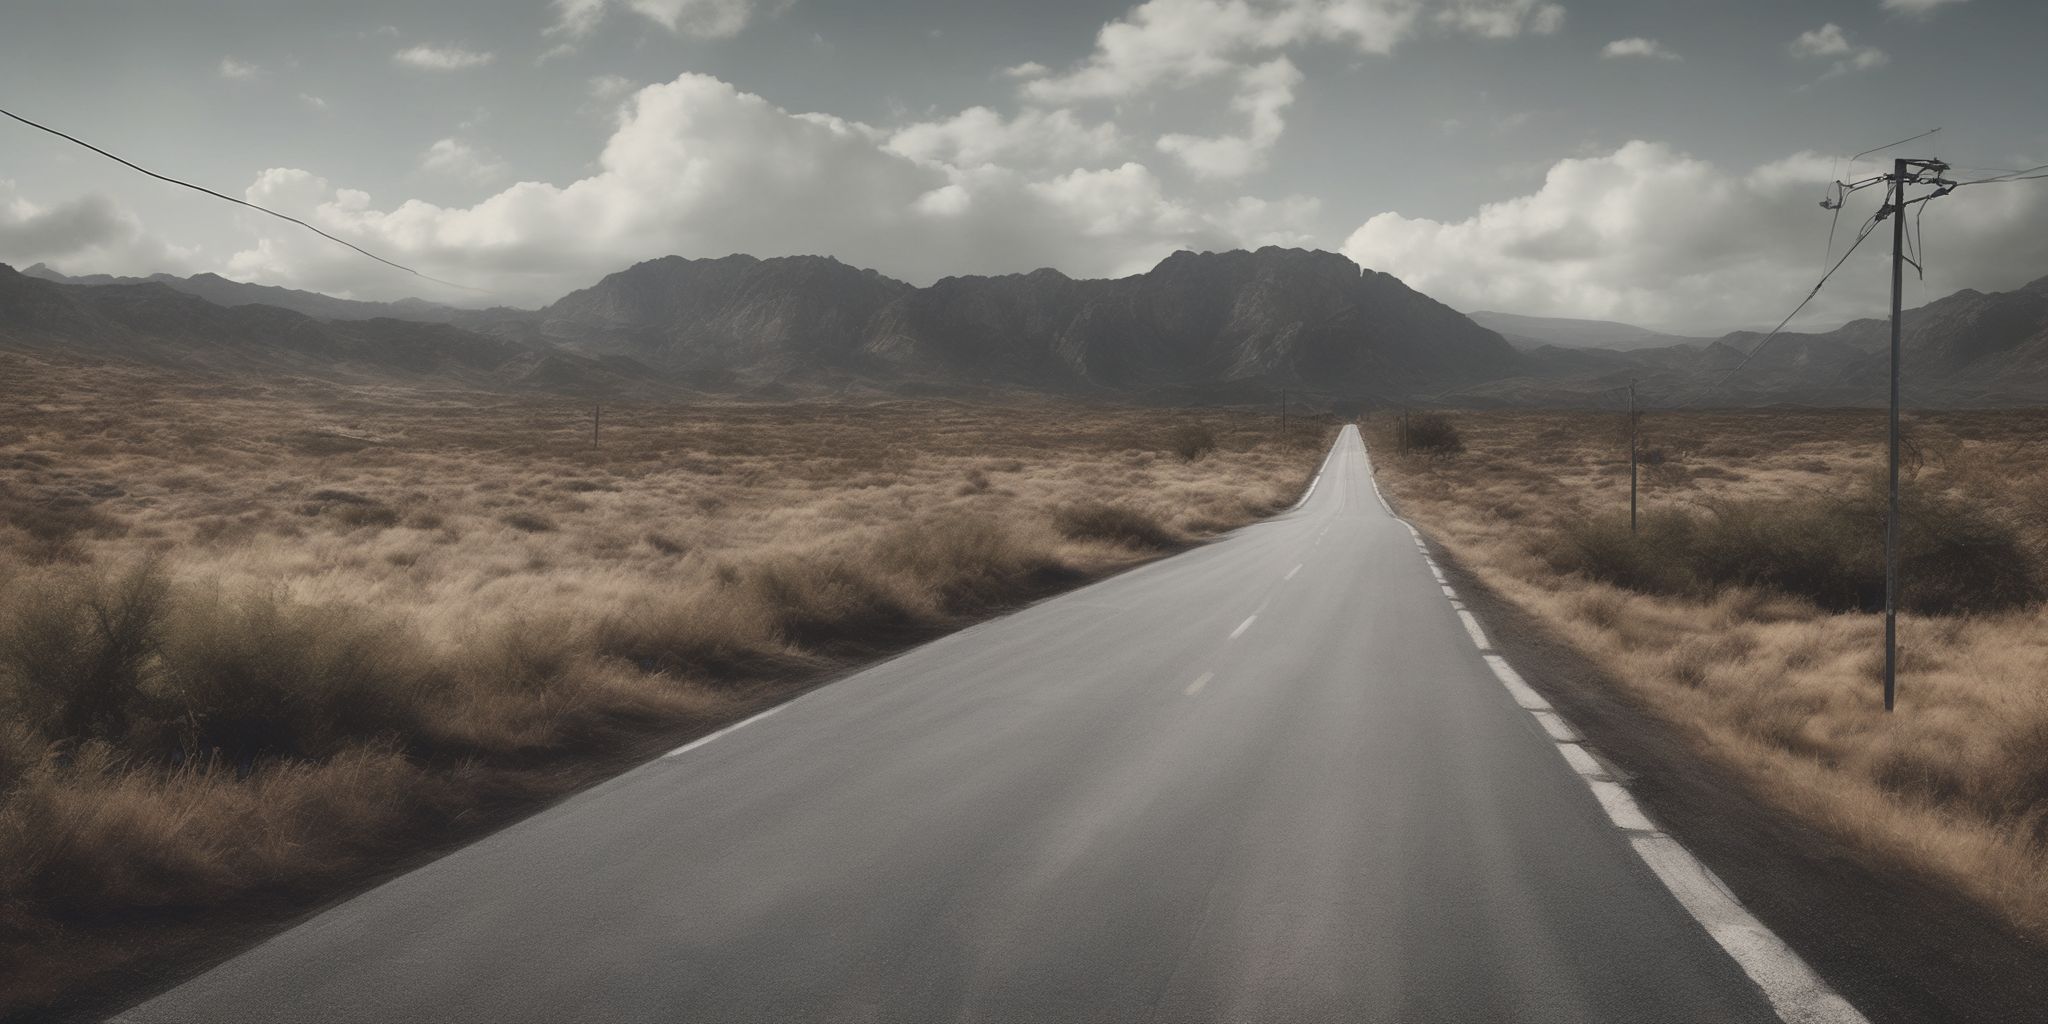 Road  in realistic, photographic style